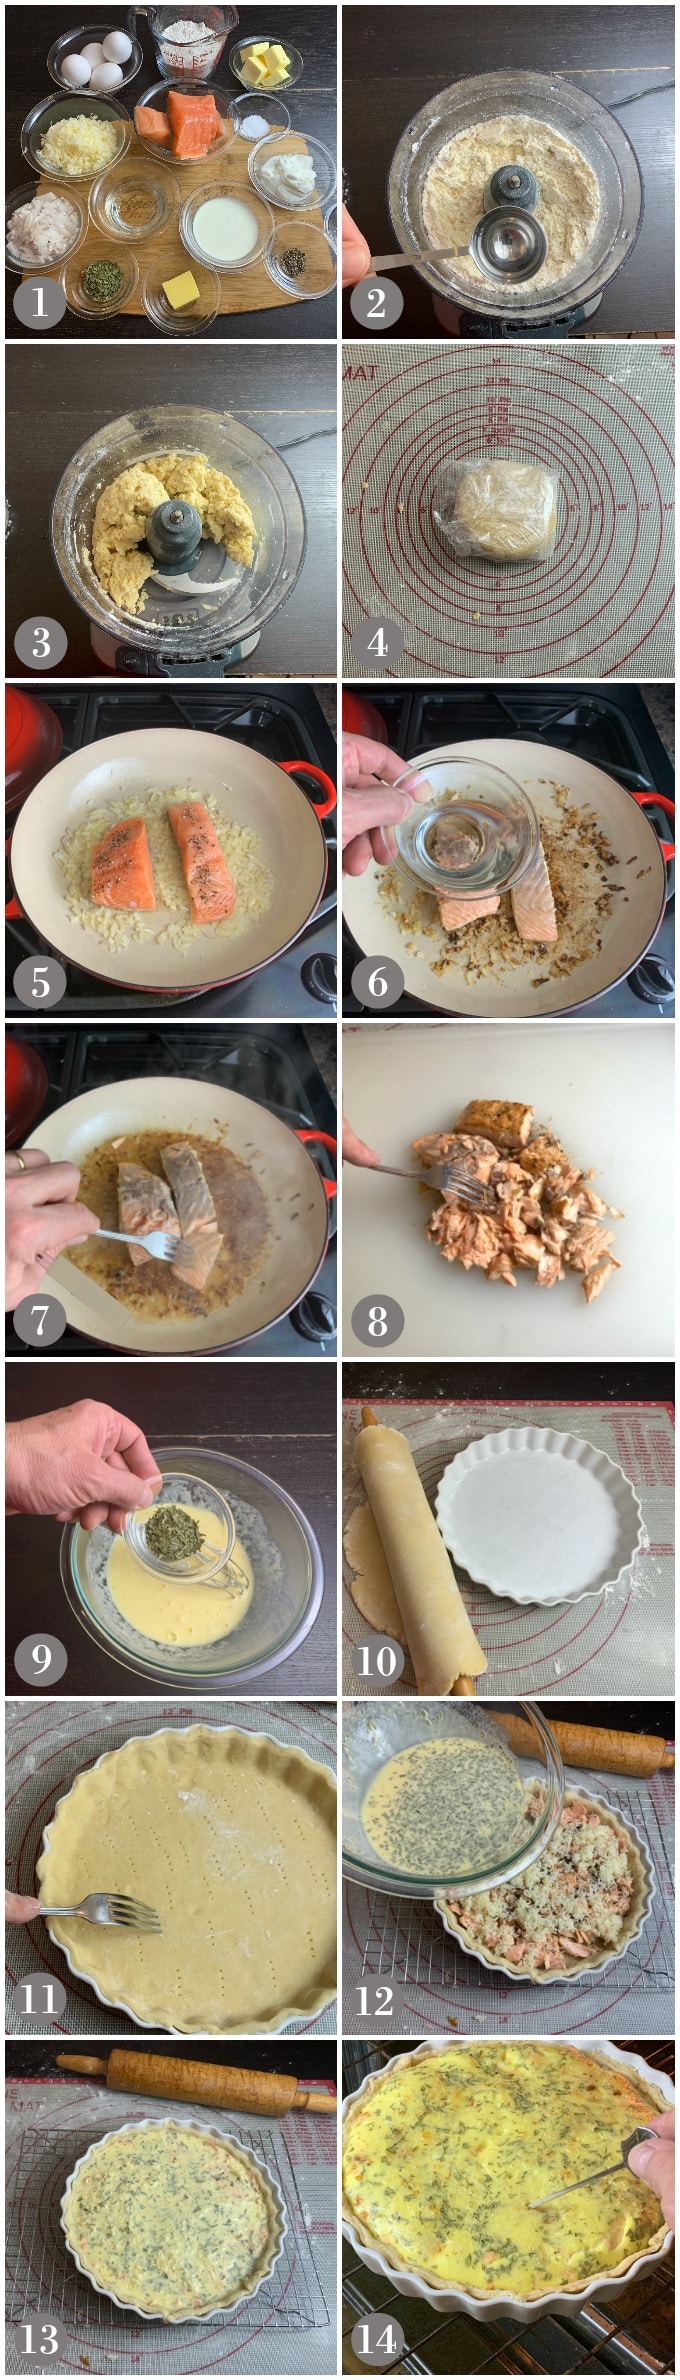 A collage of photos showing the ingredients and steps to make salmon quiche with fresh dough and filling.